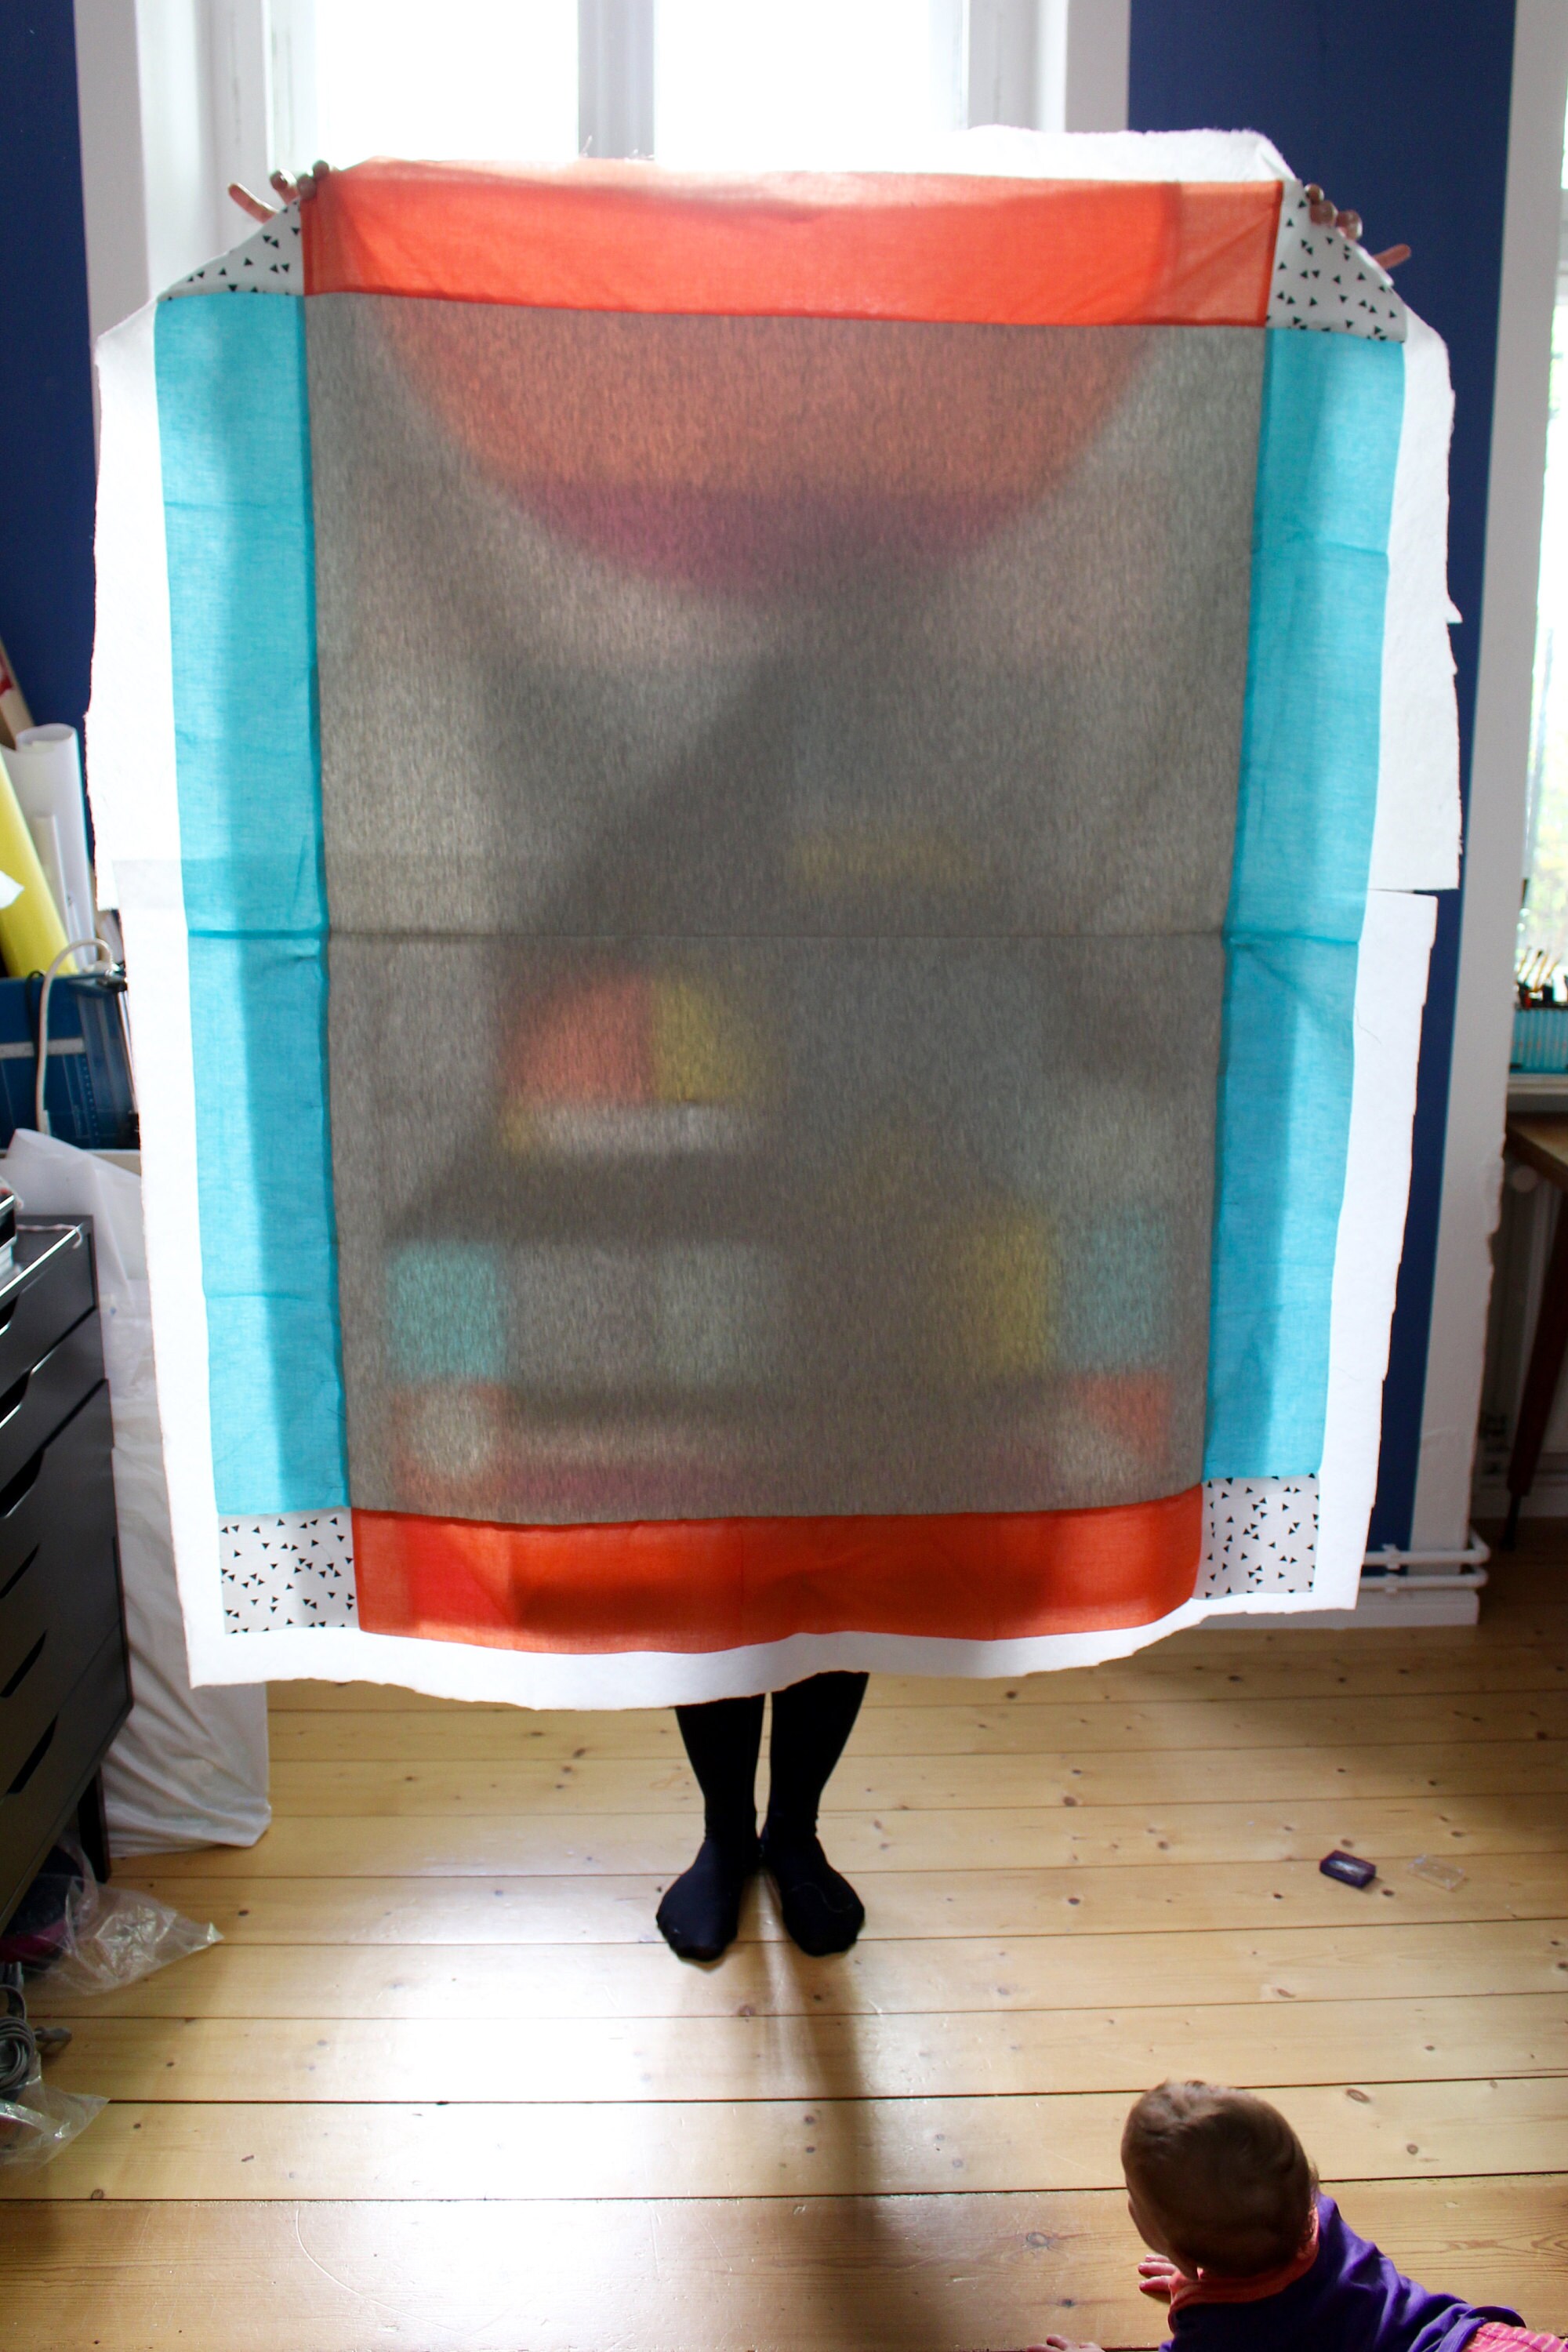 Quilt by Karolin Reichardt / Boat and Balloon